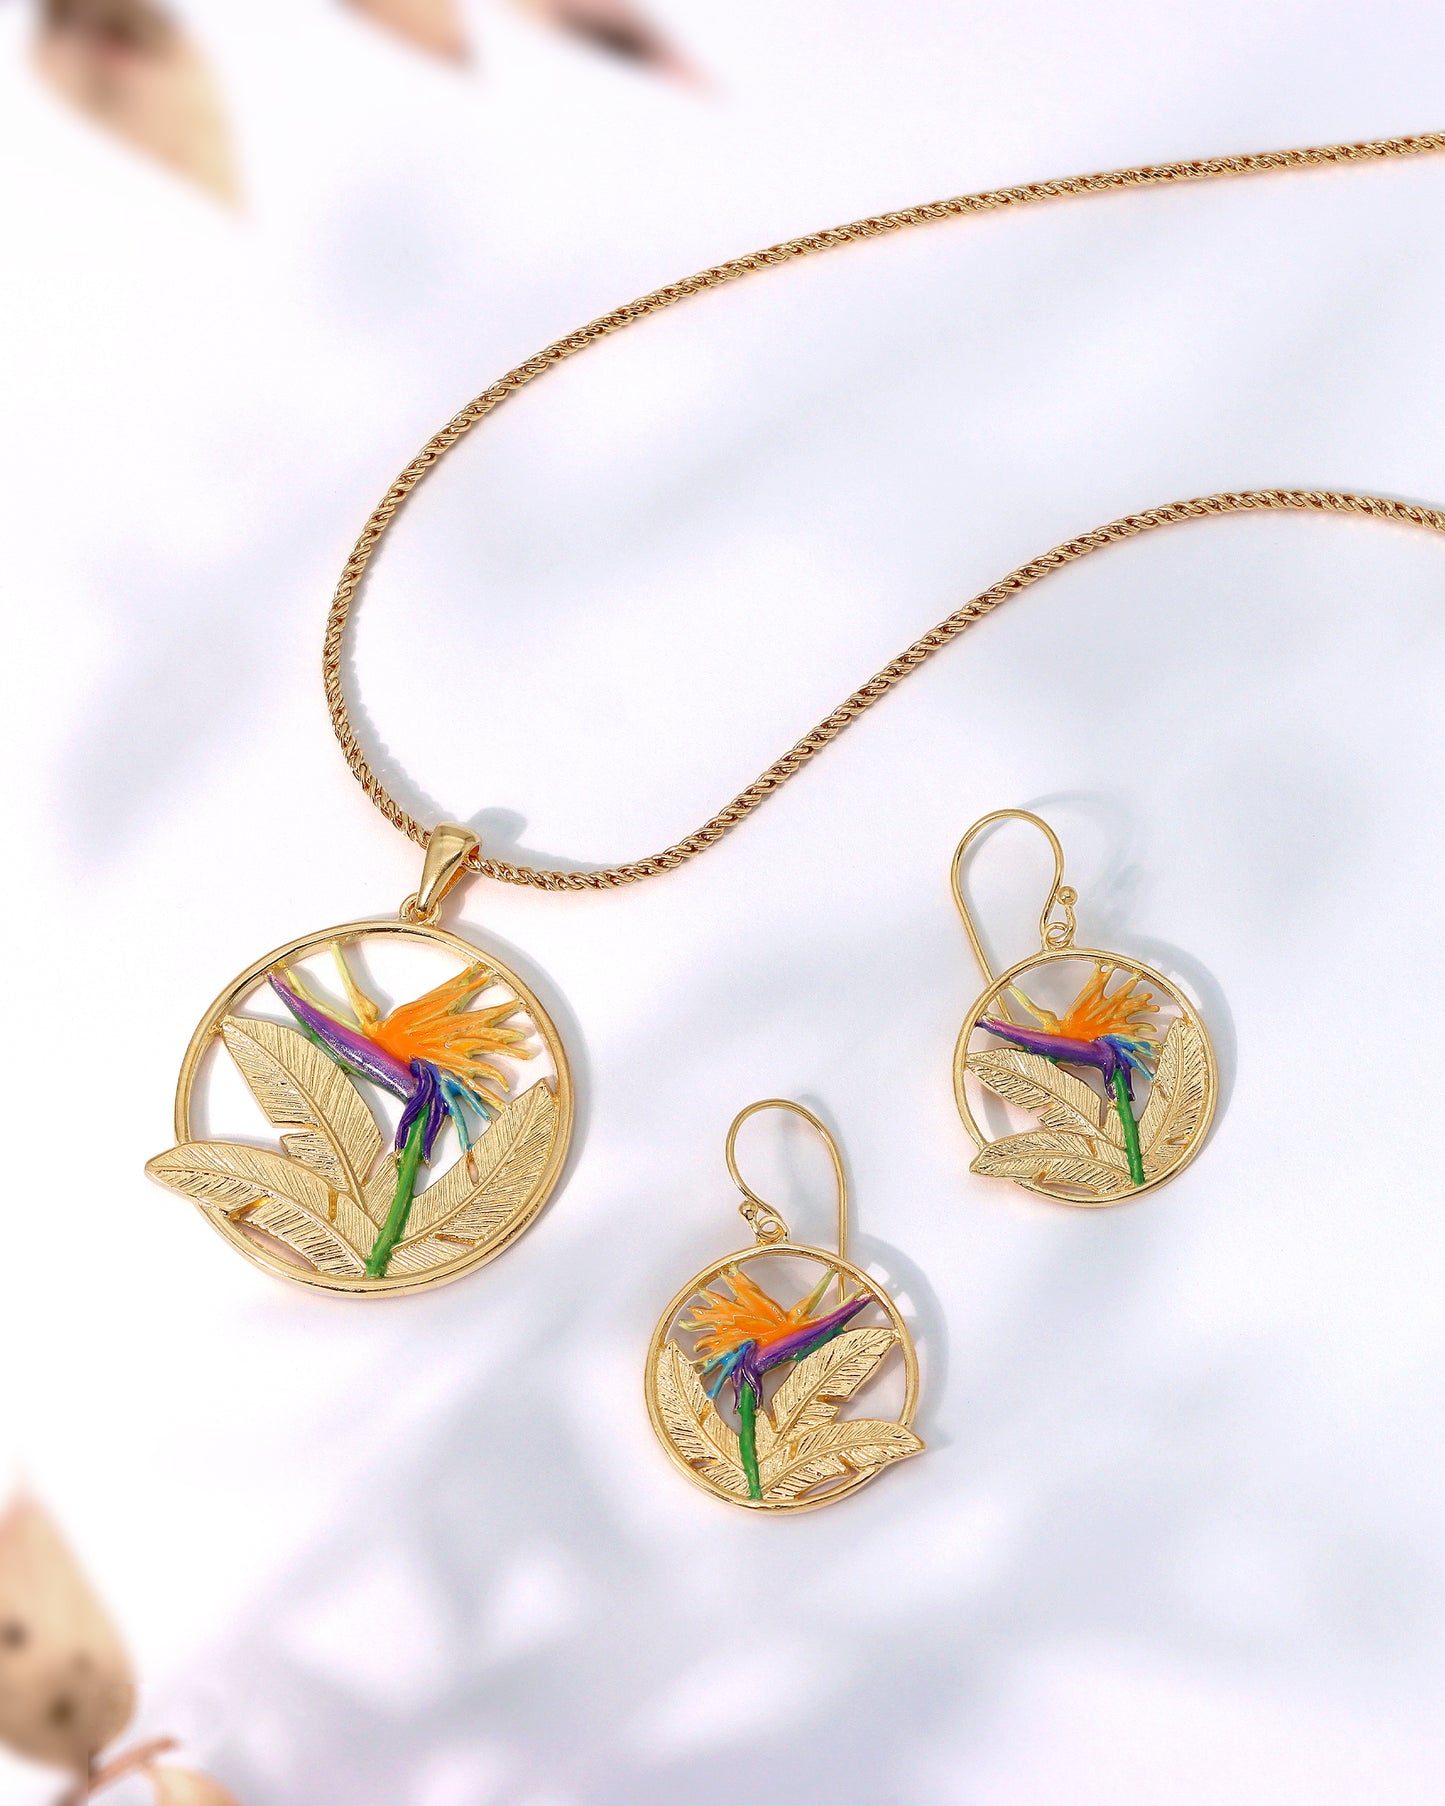 Painted Bird of Paradise Flower Earrings 18K Gold Plated